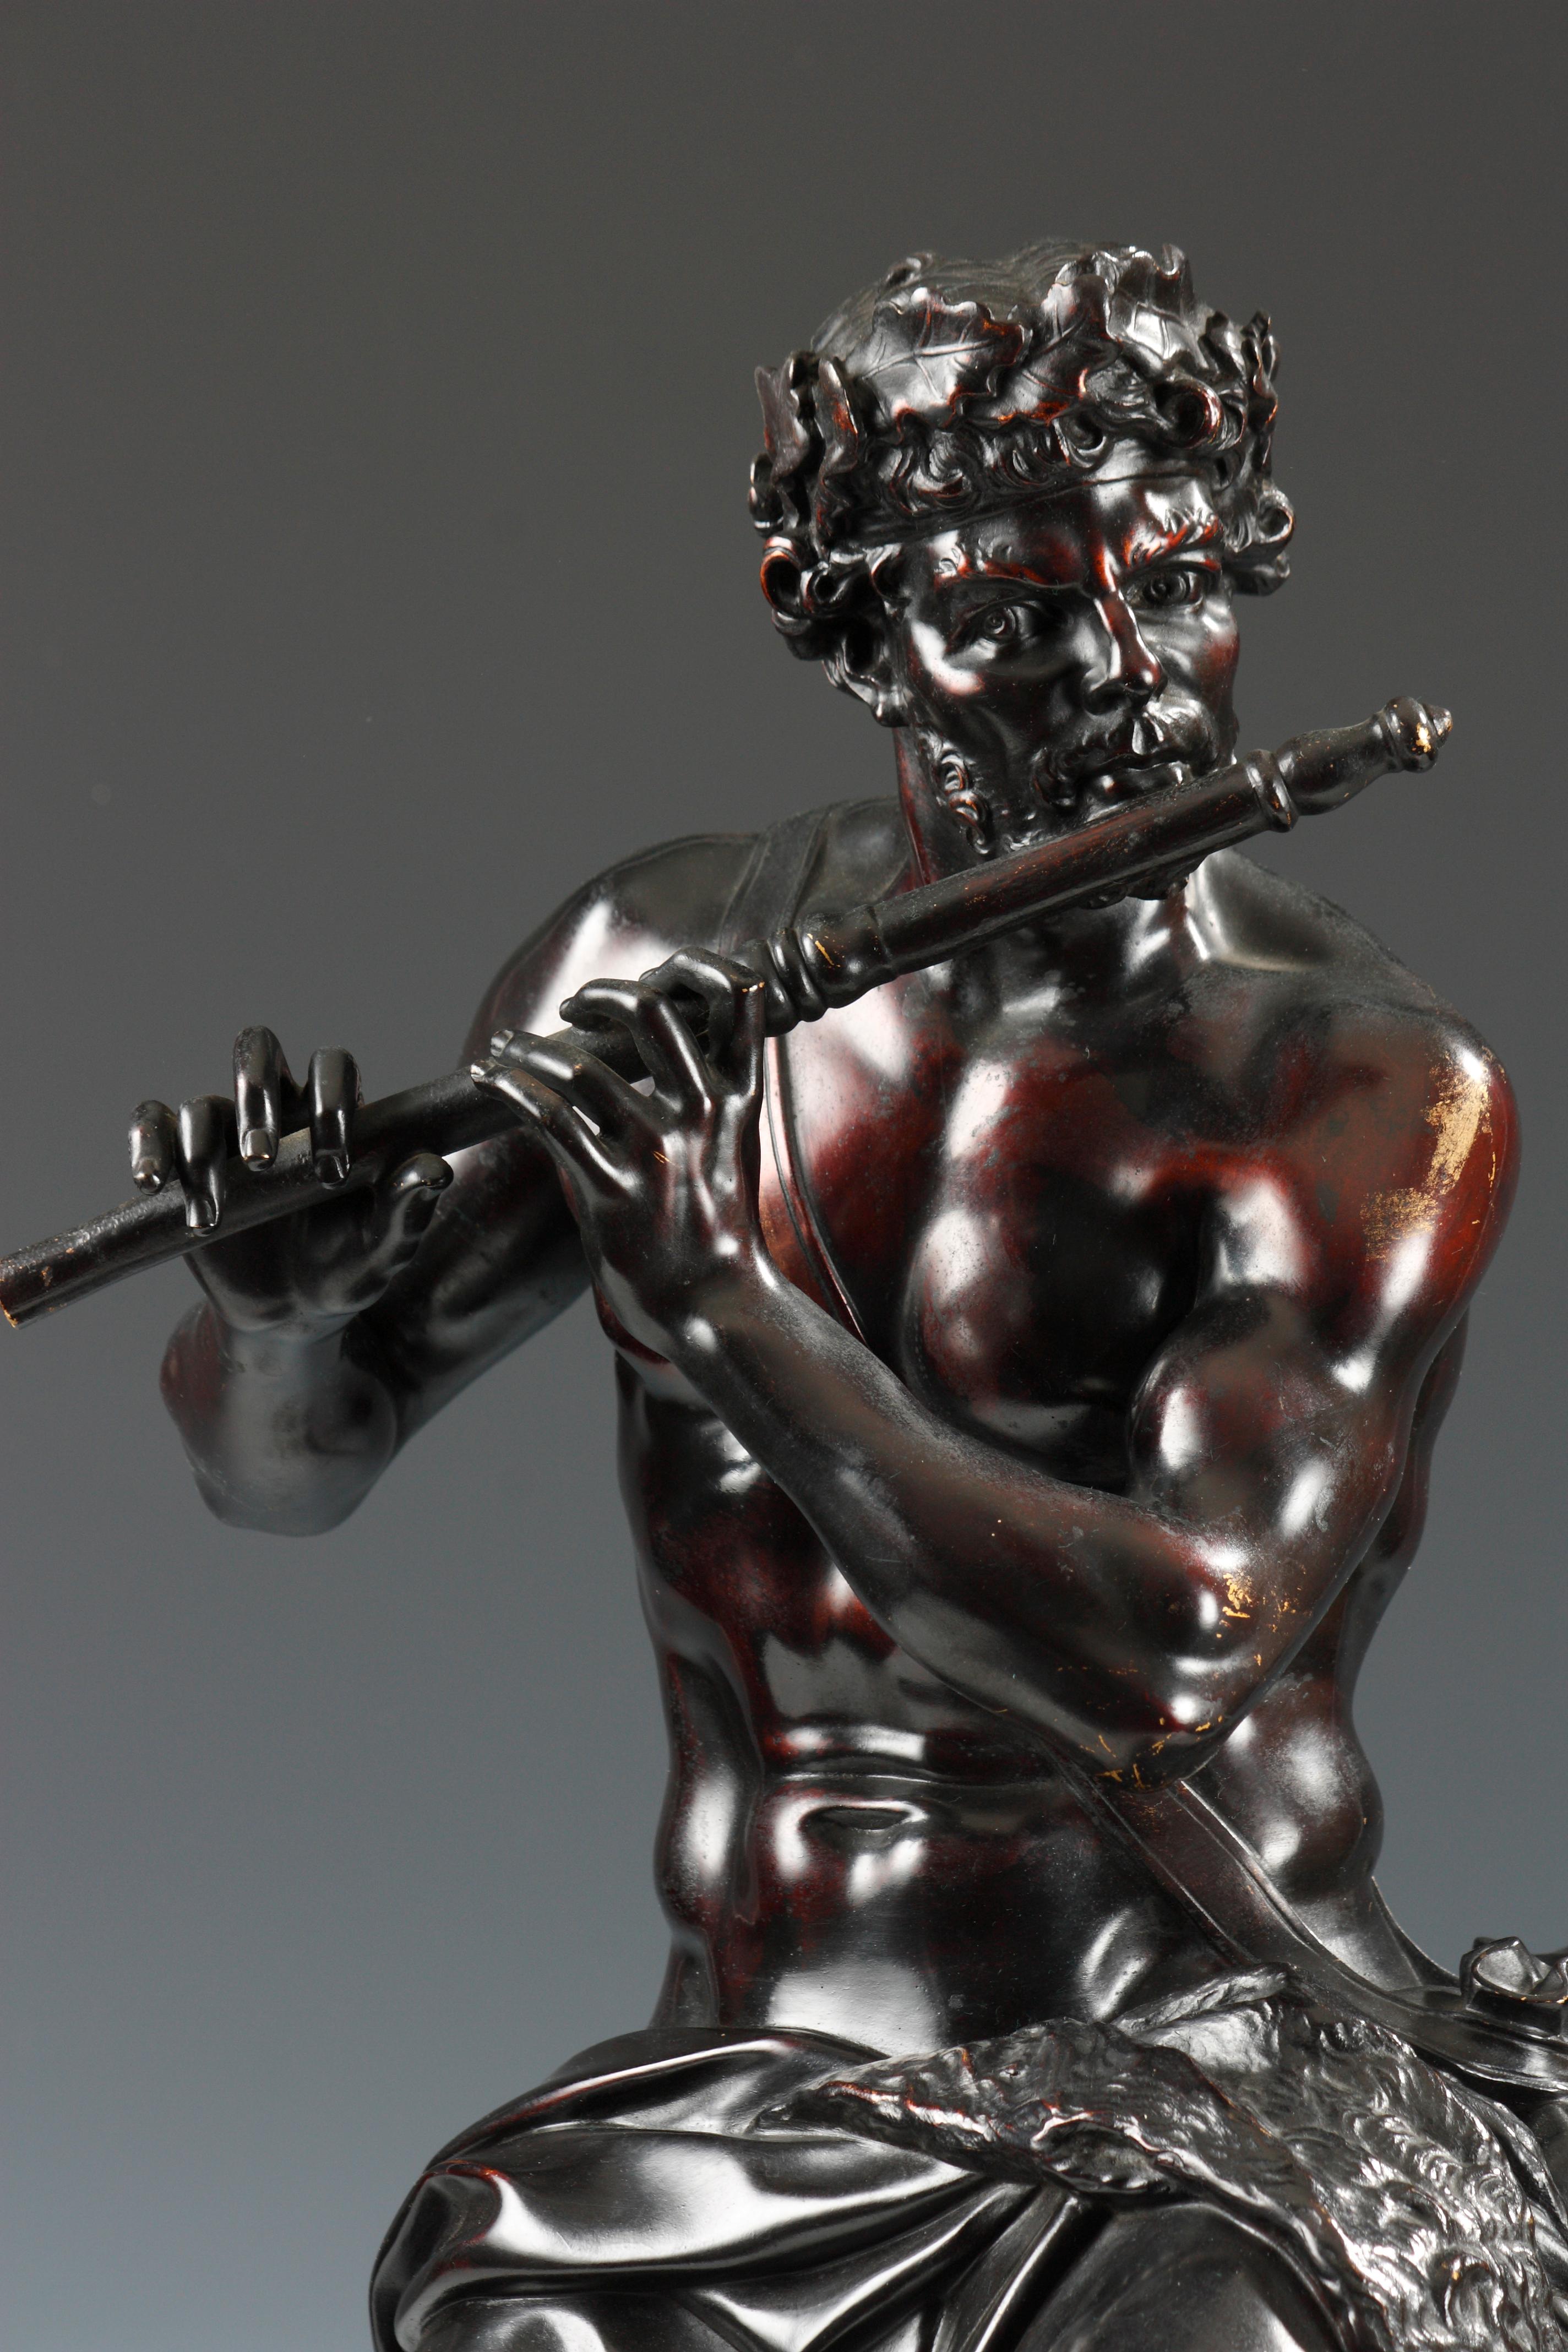 Signed F. Barbedienne Fondeur and stamped Achille Collas.

A patinated bronze figural group representing a shepherd playing his flute with a young centaur imposing silence at his sides. The group stands on a Louis XIV style gilded bronze